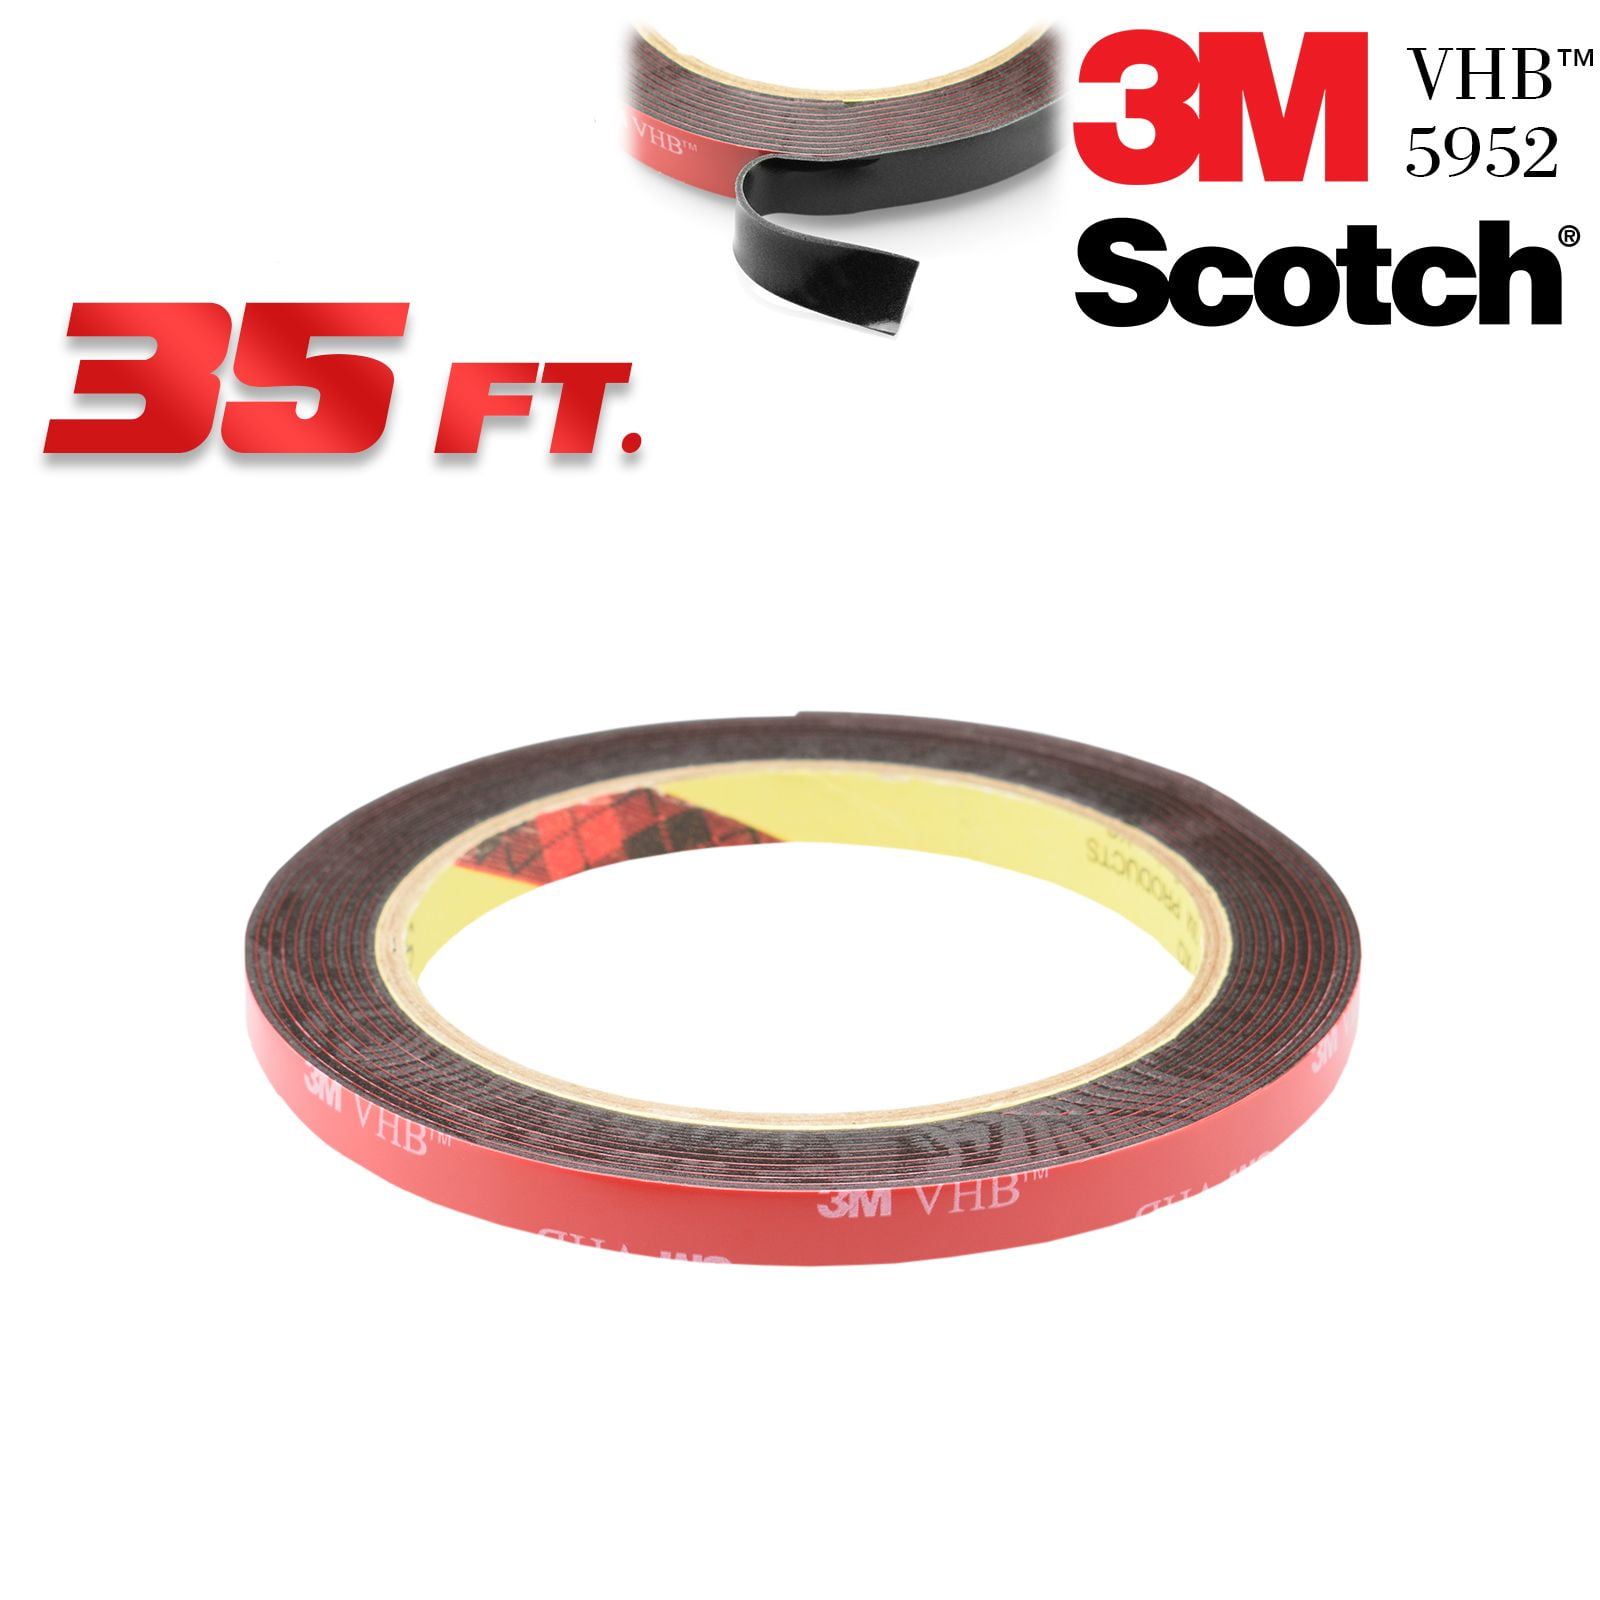 3M 5952 VHB 8mm x 33Meters Double Sided Foam Adhesive Automotive Mounting Tape 